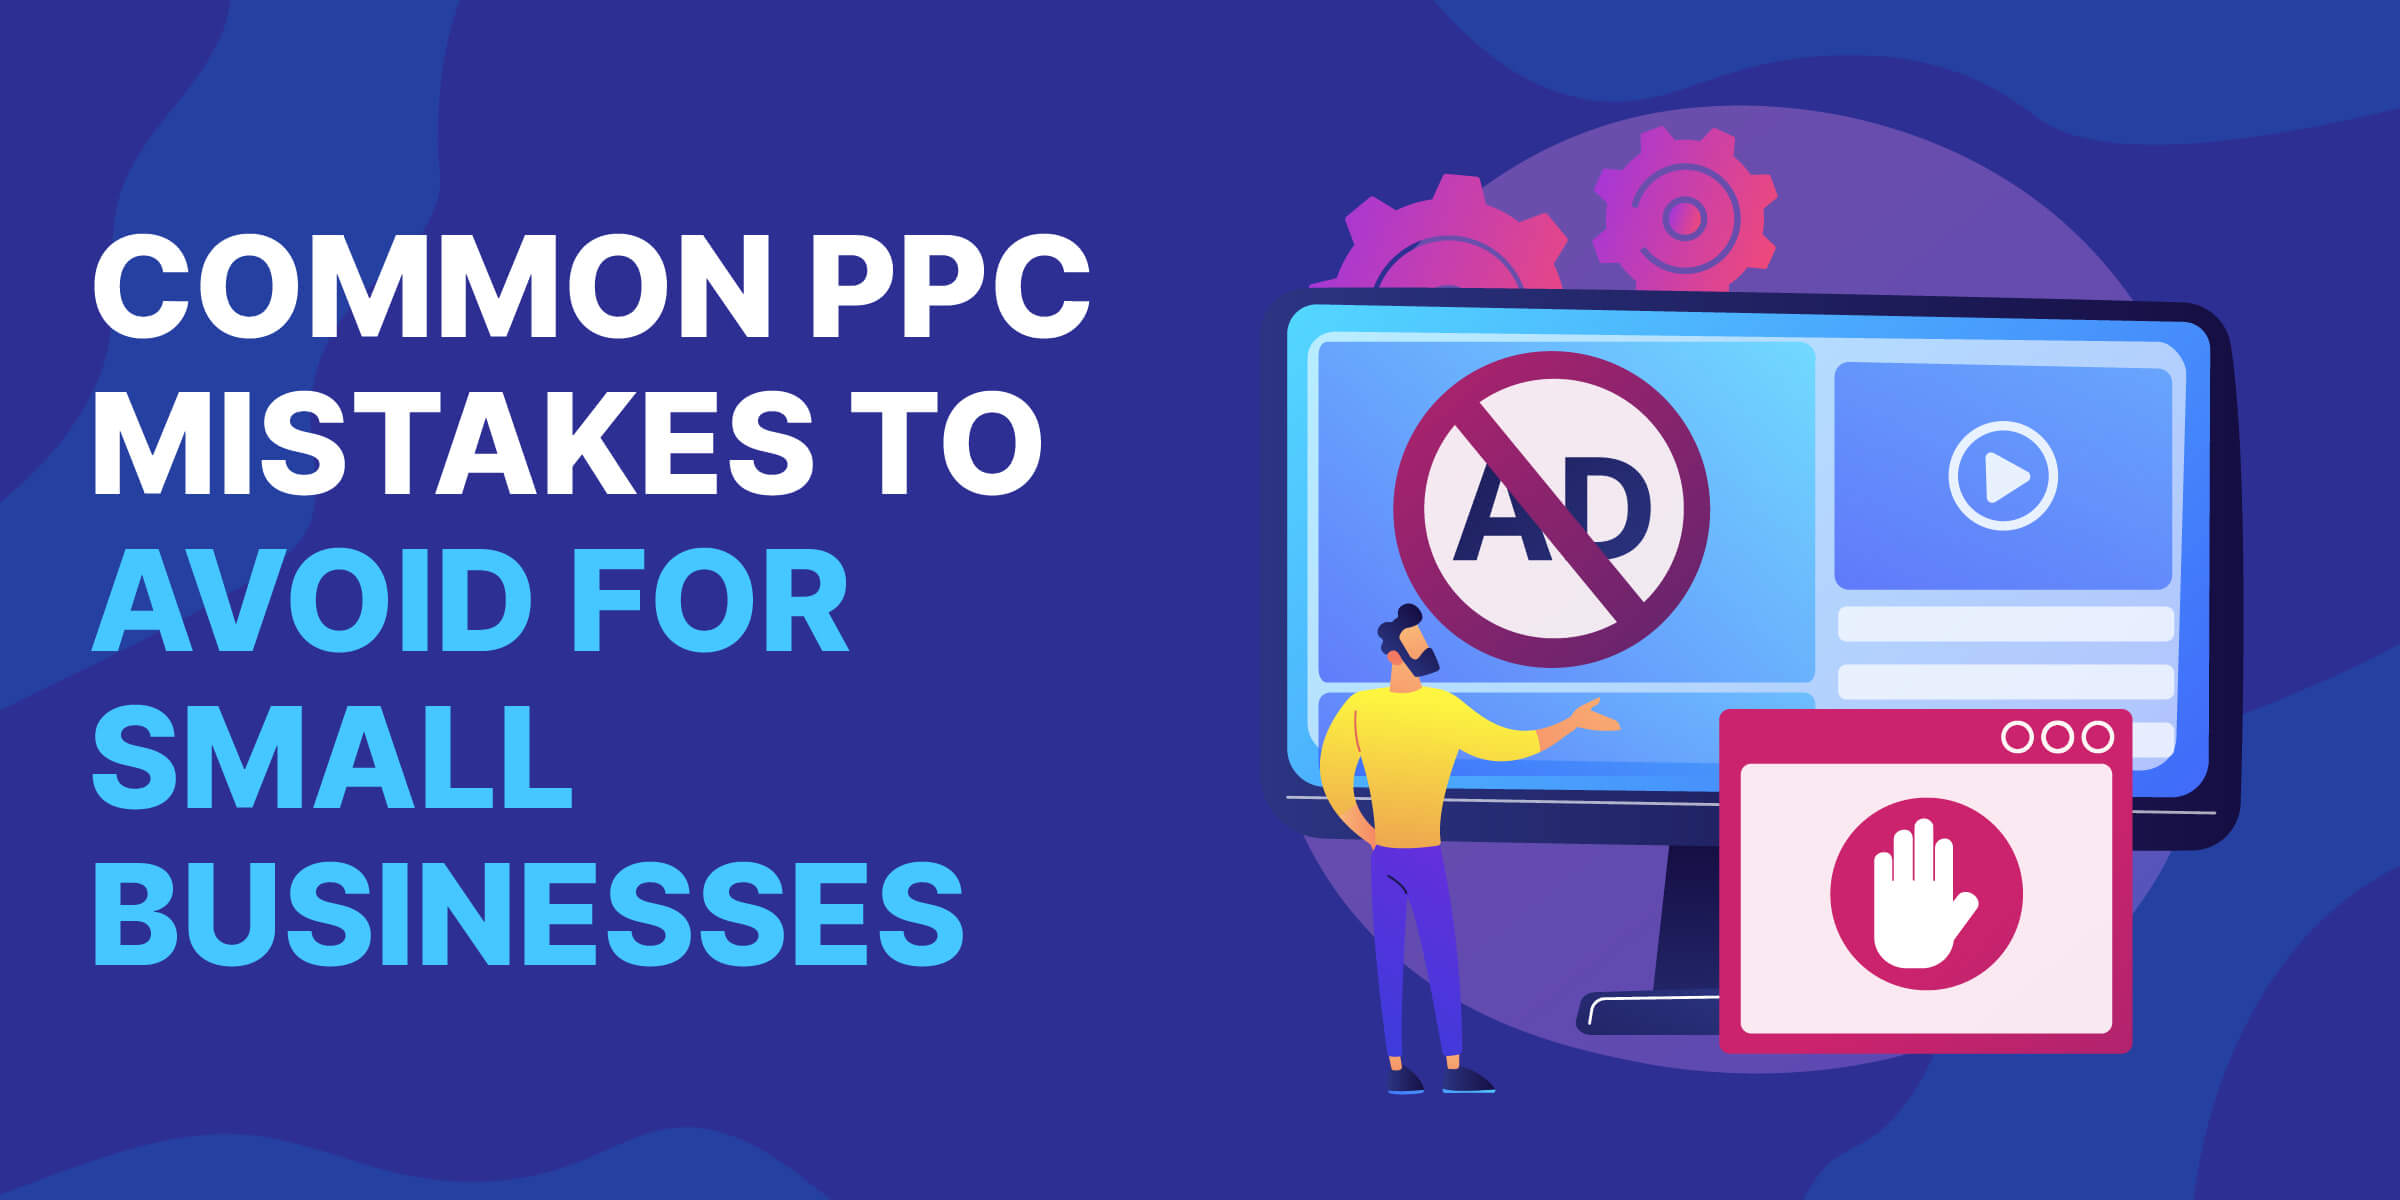 Common PPC Mistakes to Avoid Small Businesses